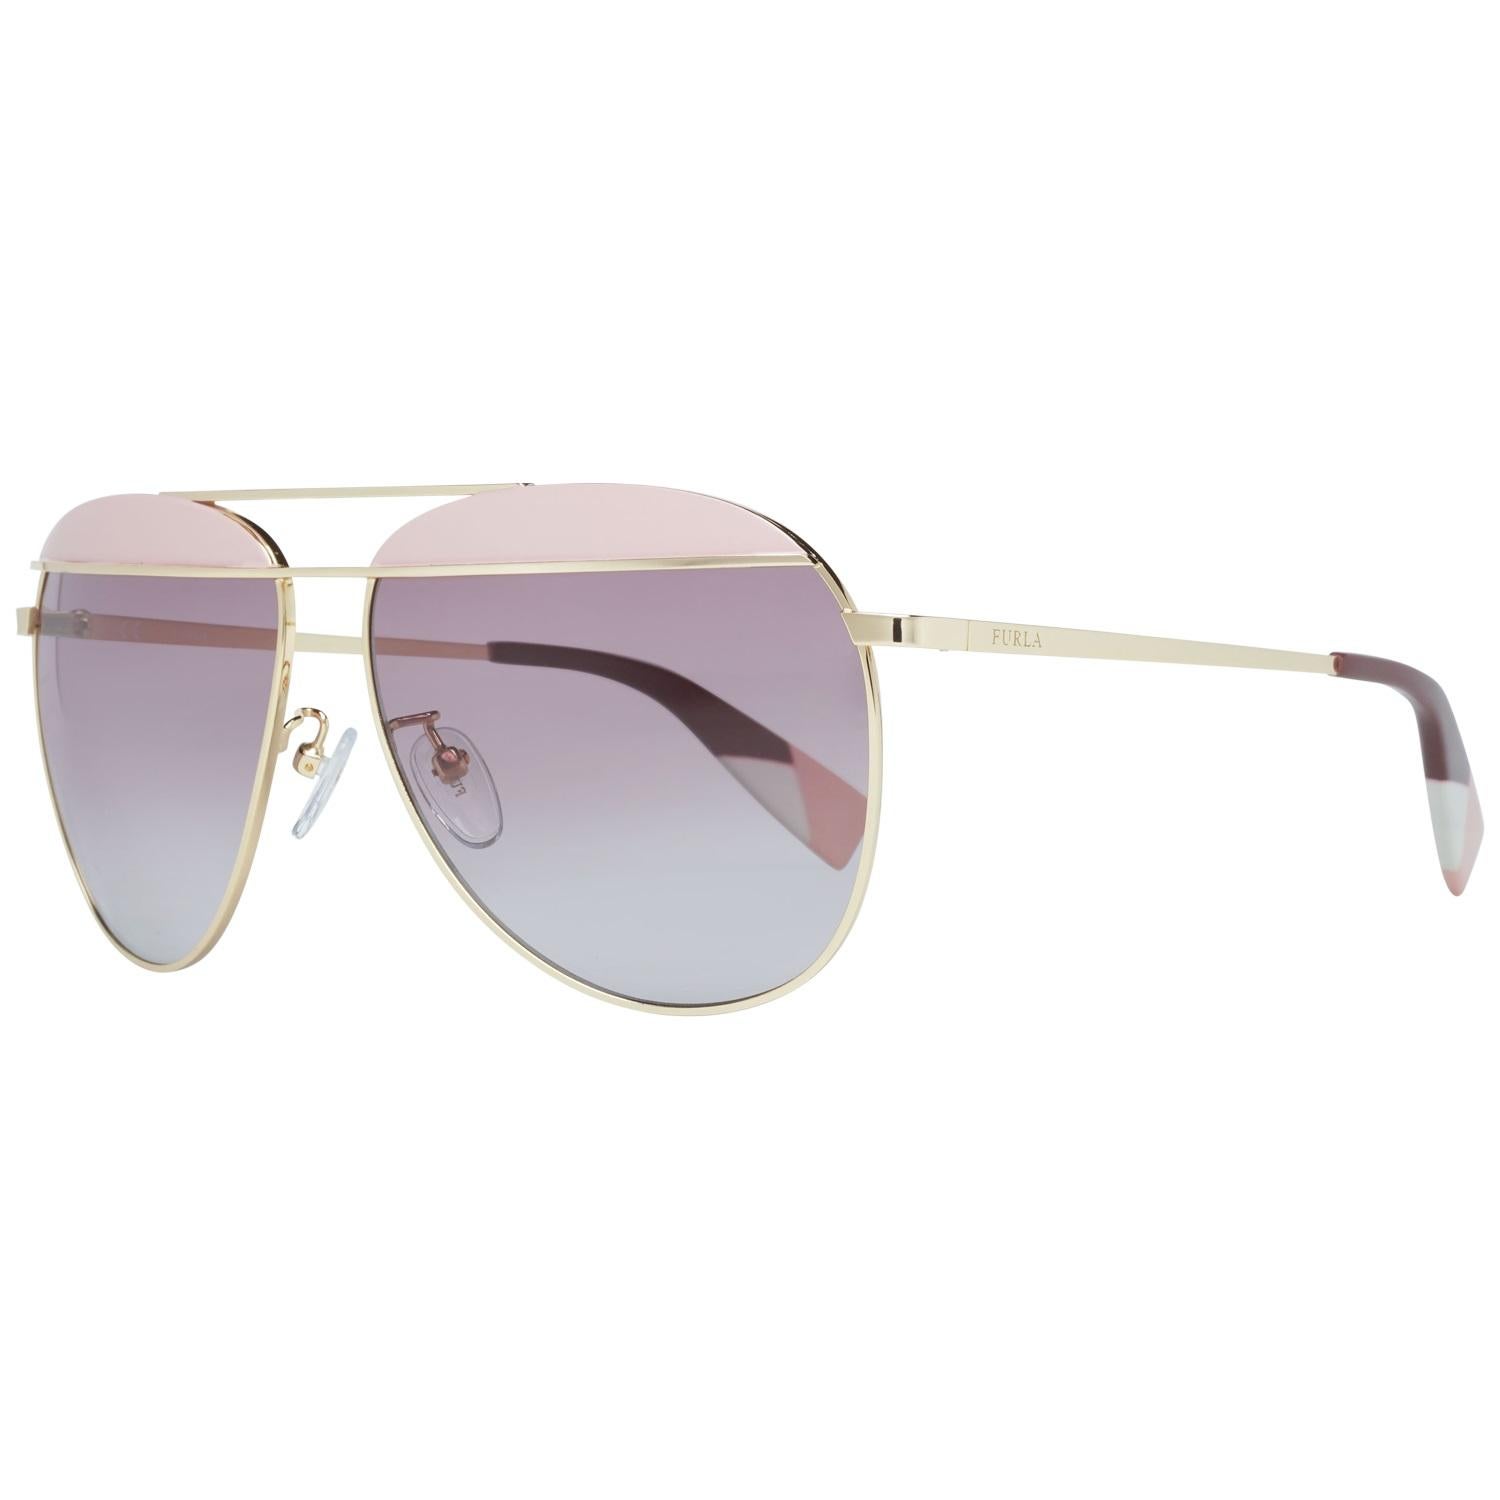 Details

MATERIAL: Metal

COLOR: Gold

MODEL: SFU236 590323

GENDER: Women

COUNTRY OF MANUFACTURE: China

TYPE: Sunglasses

ORIGINAL CASE?: Yes

STYLE: Aviator

OCCASION: Casual

FEATURES: Lightweight

LENS COLOR: Grey

LENS TECHNOLOGY: